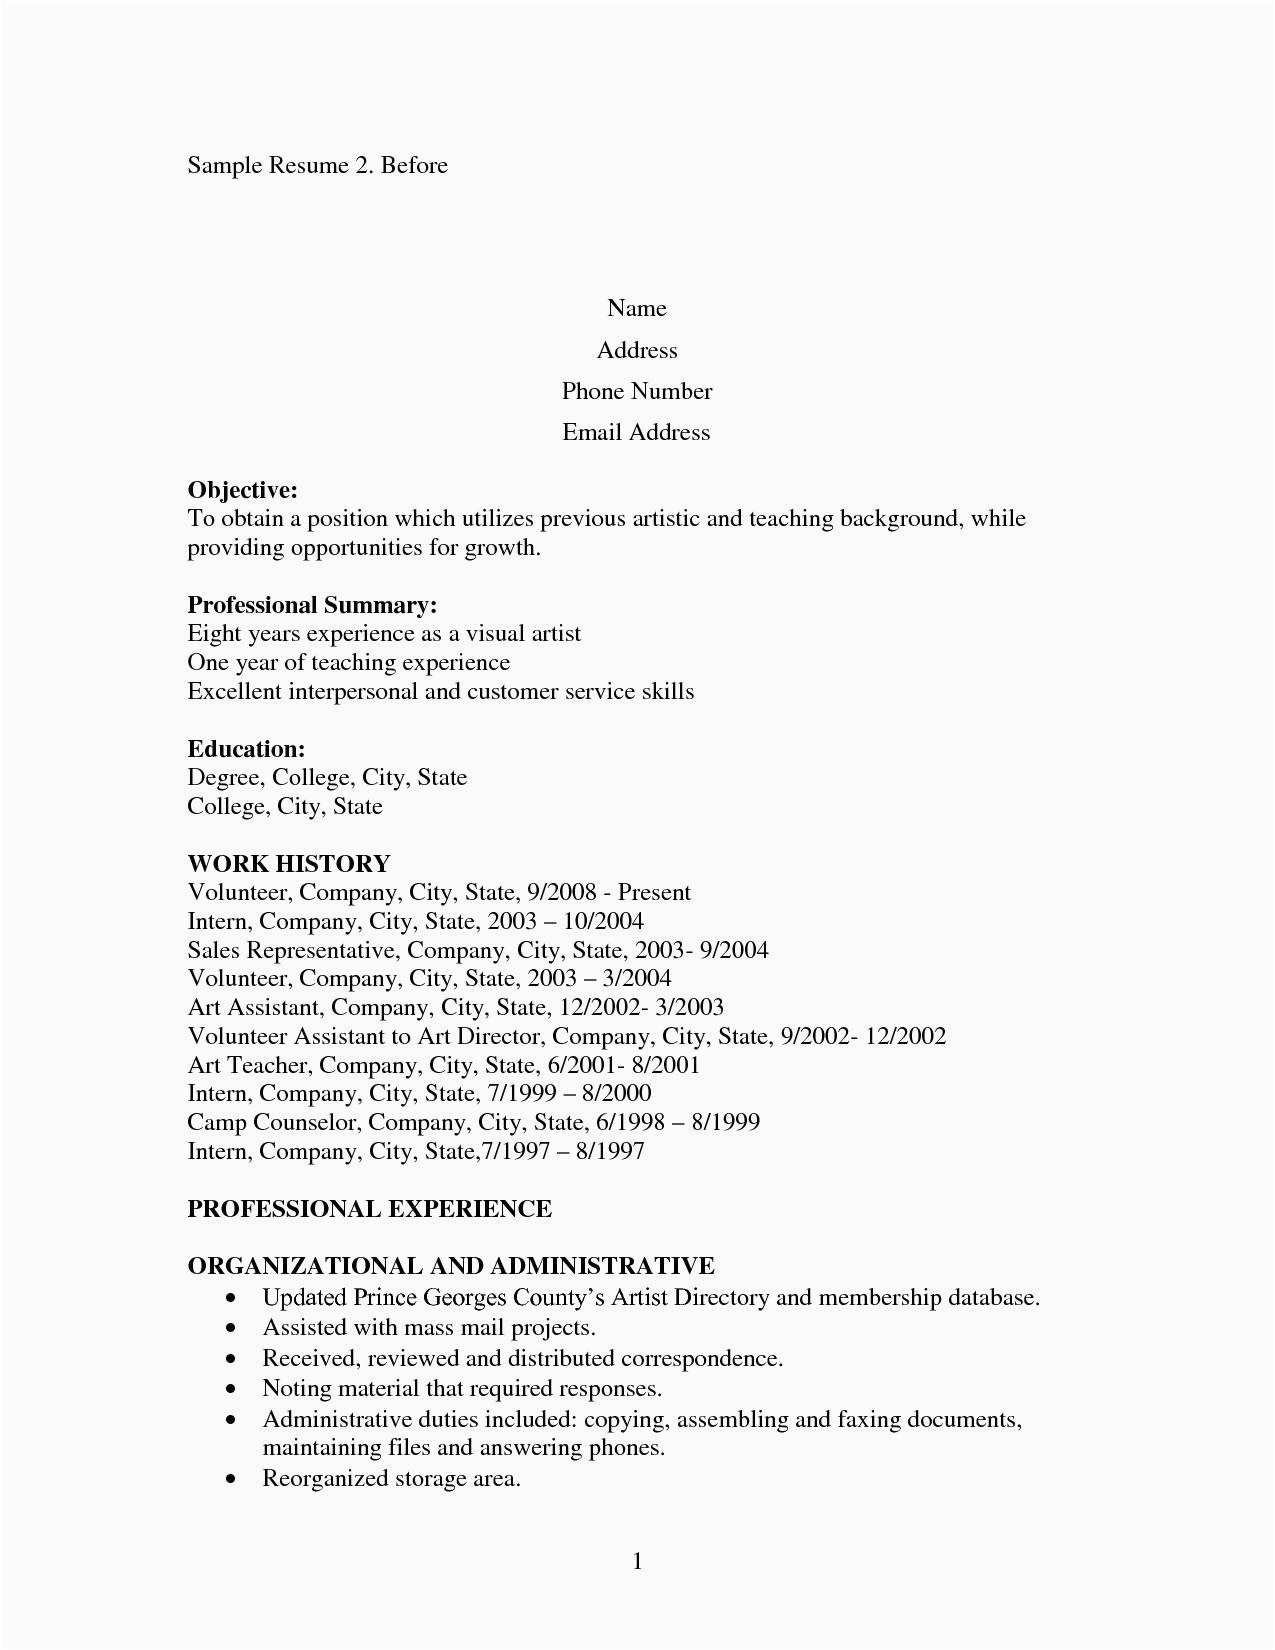 Sample Resume for Housewife Returning to Work 13 Sample Resume Stay at Home Mom Returning to Work